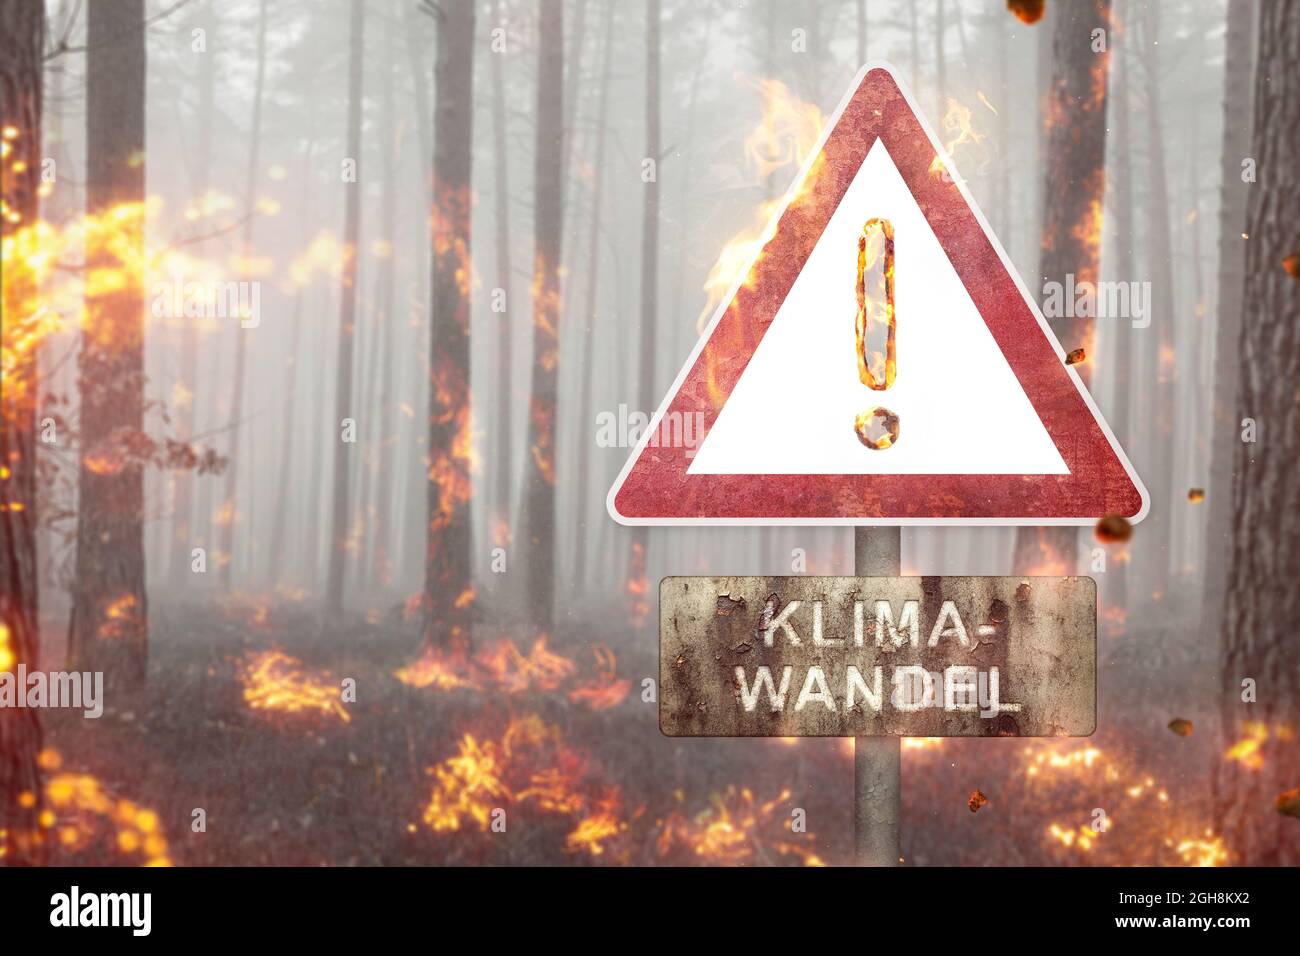 Climate Change warning sign in a burning forest Stock Photo